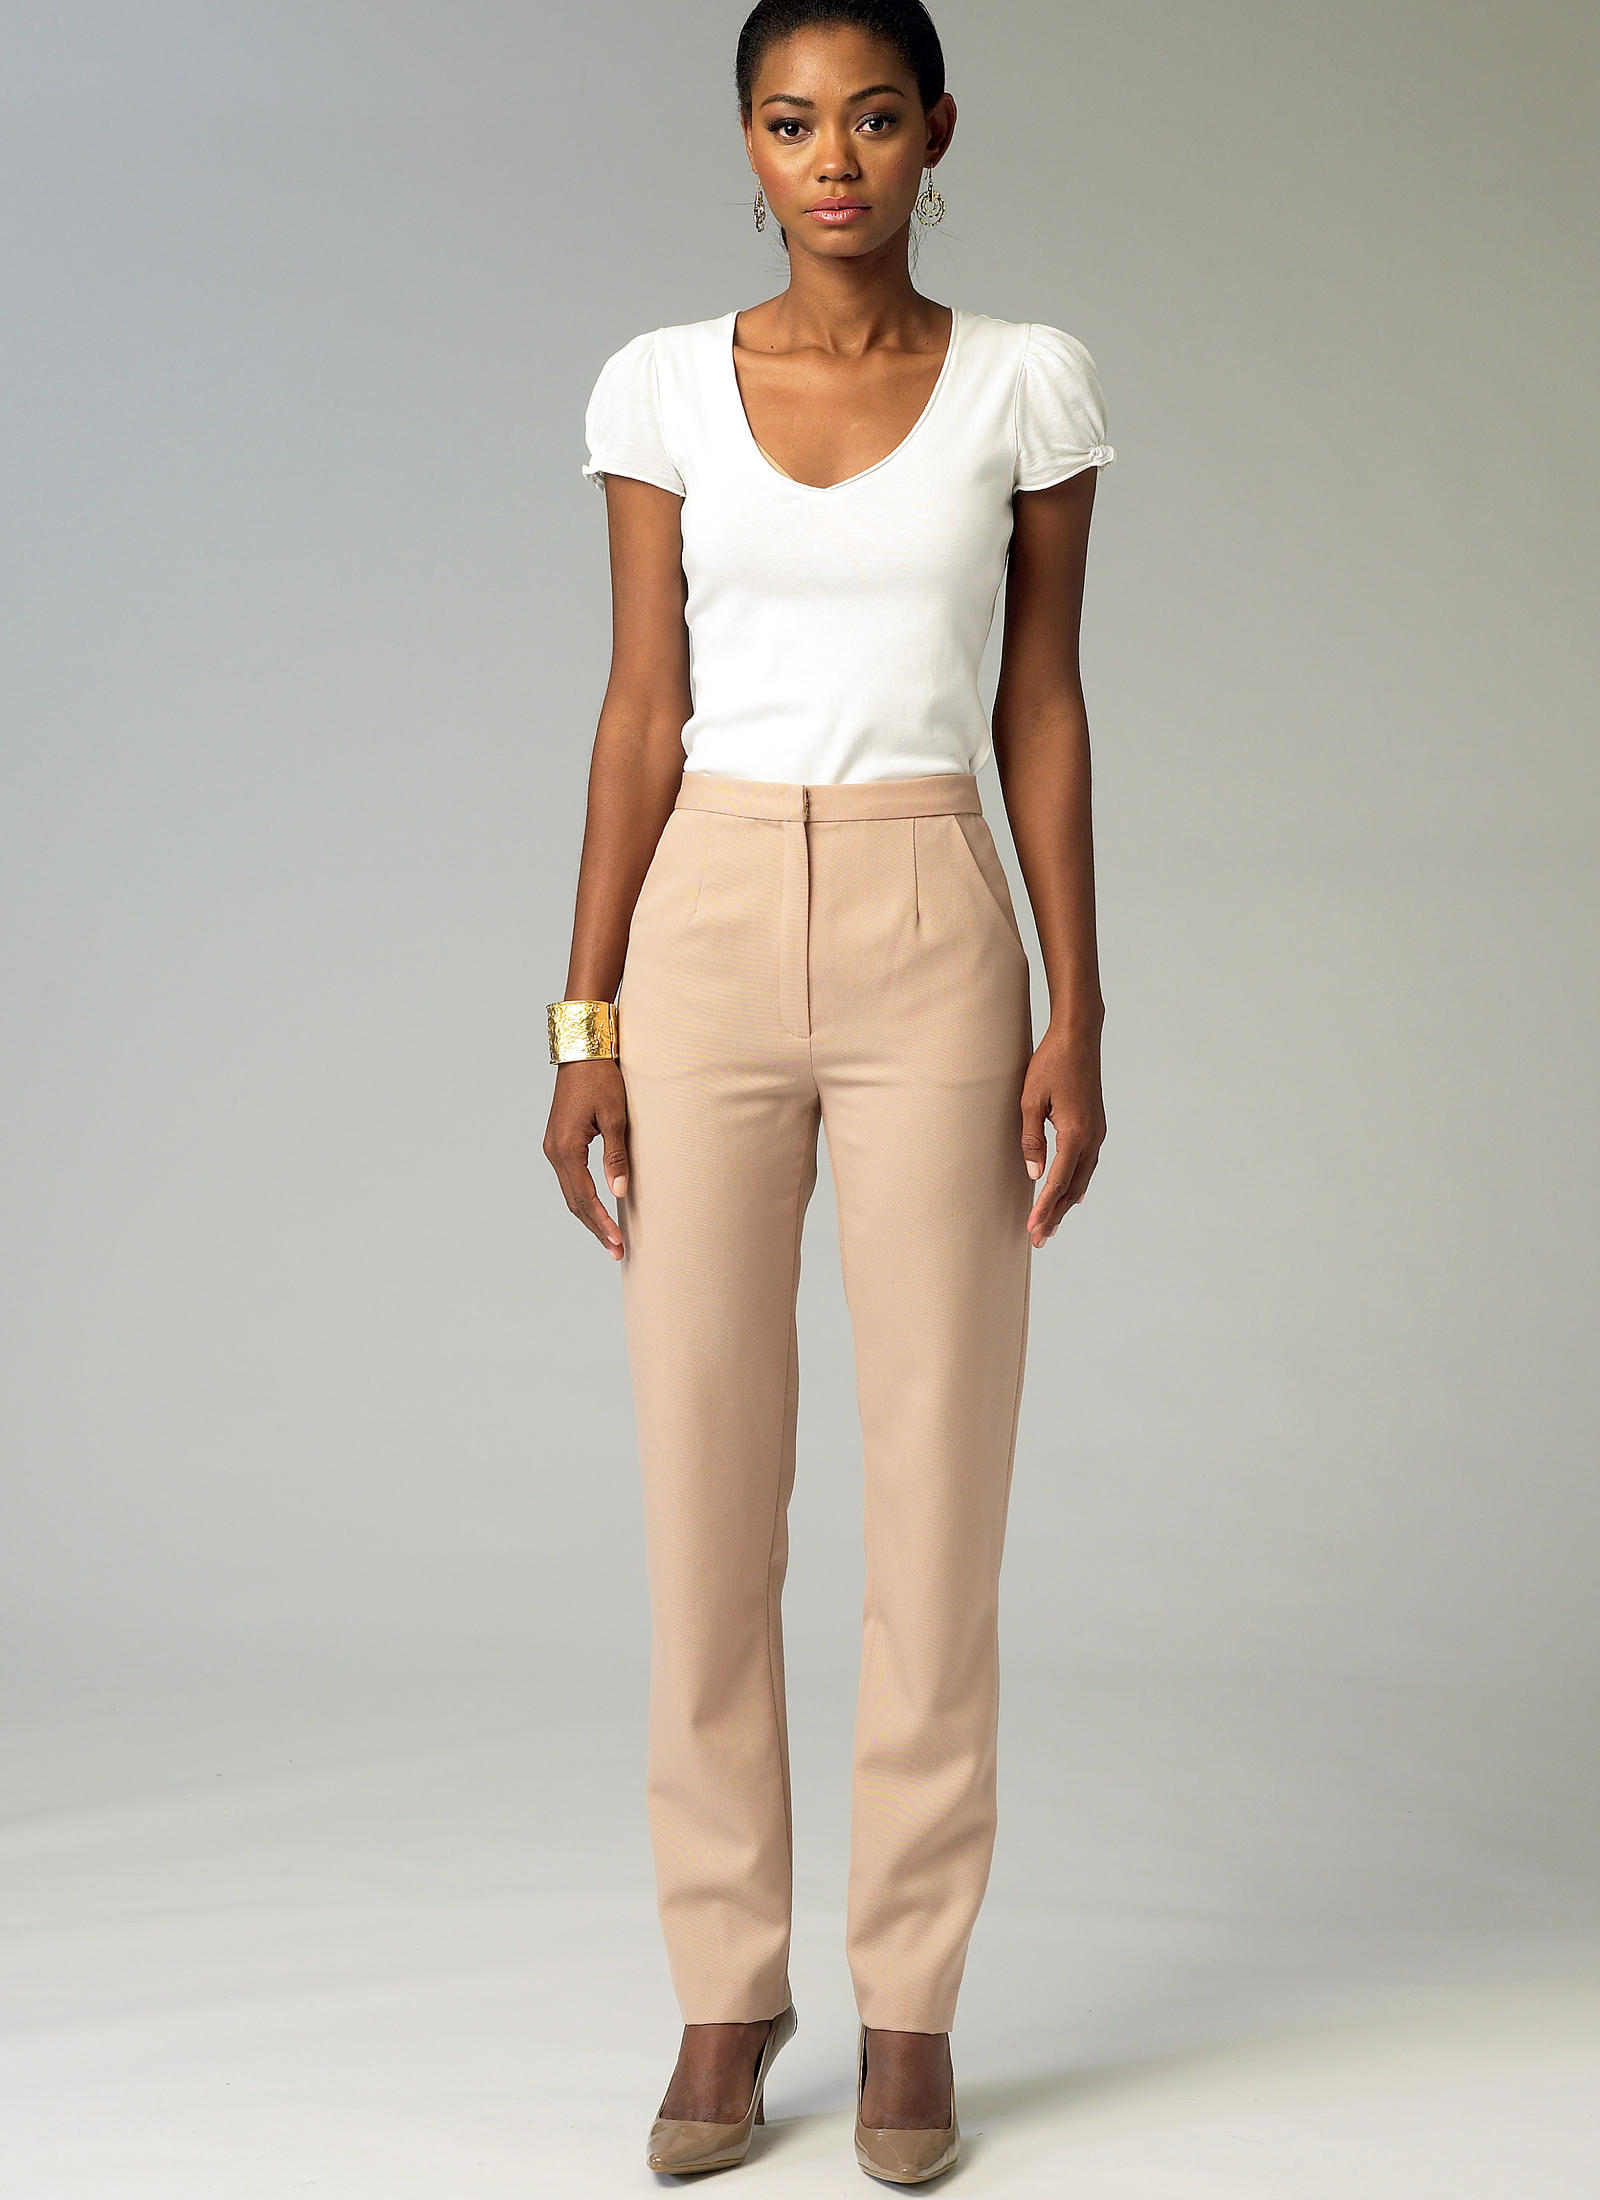 McCall's Misses'/Women's Tapered Pants Pattern